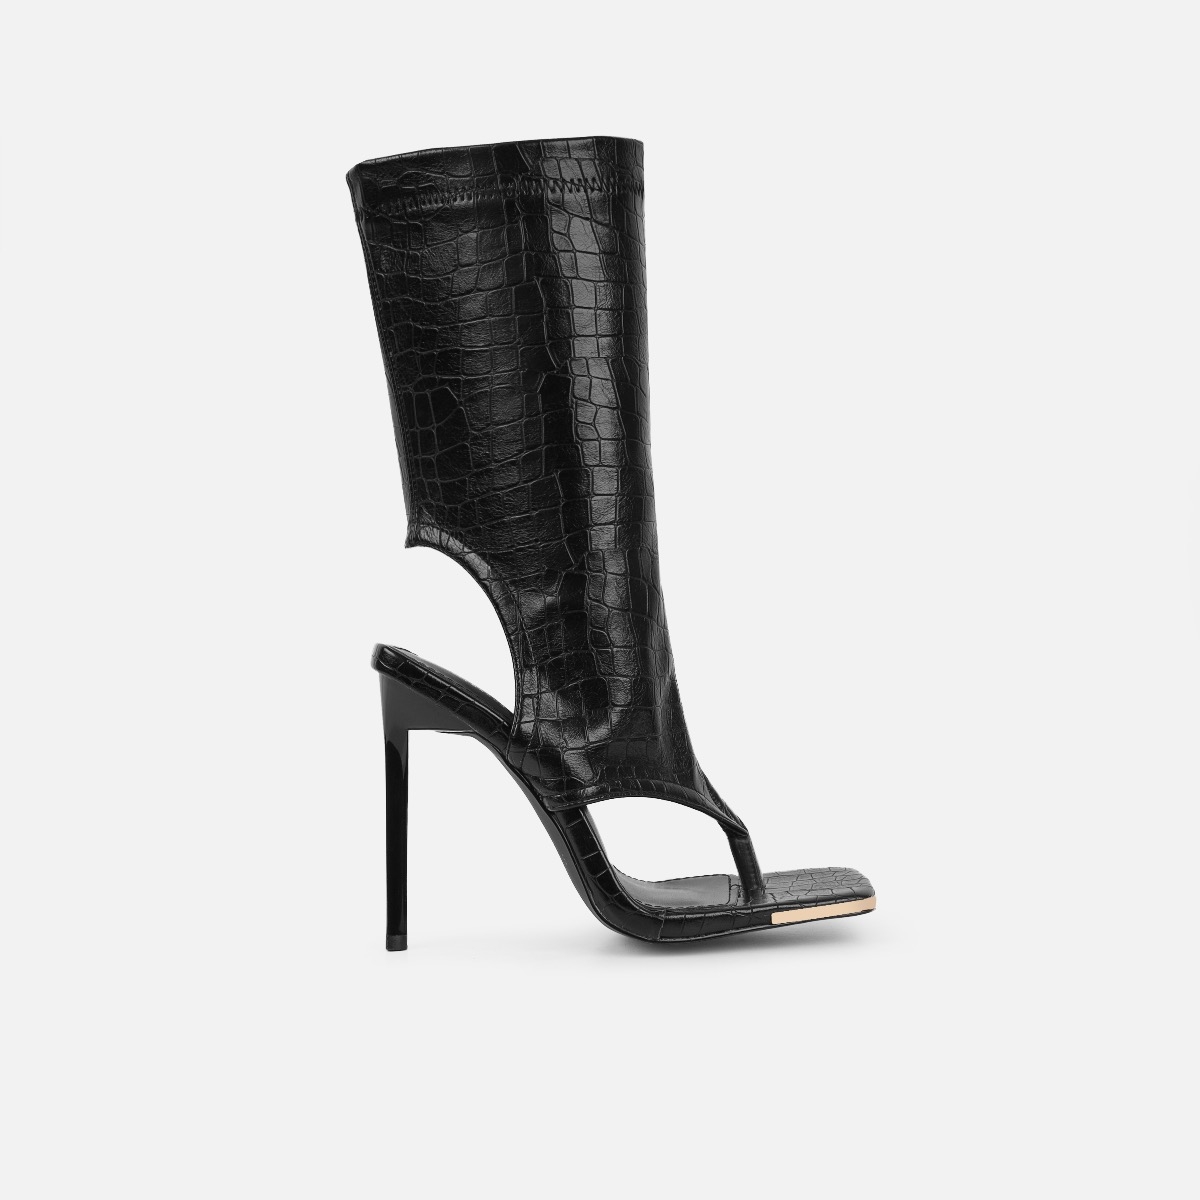 Amrezy Empire Black Quilted Stiletto Thigh High Boots | SIMMI London